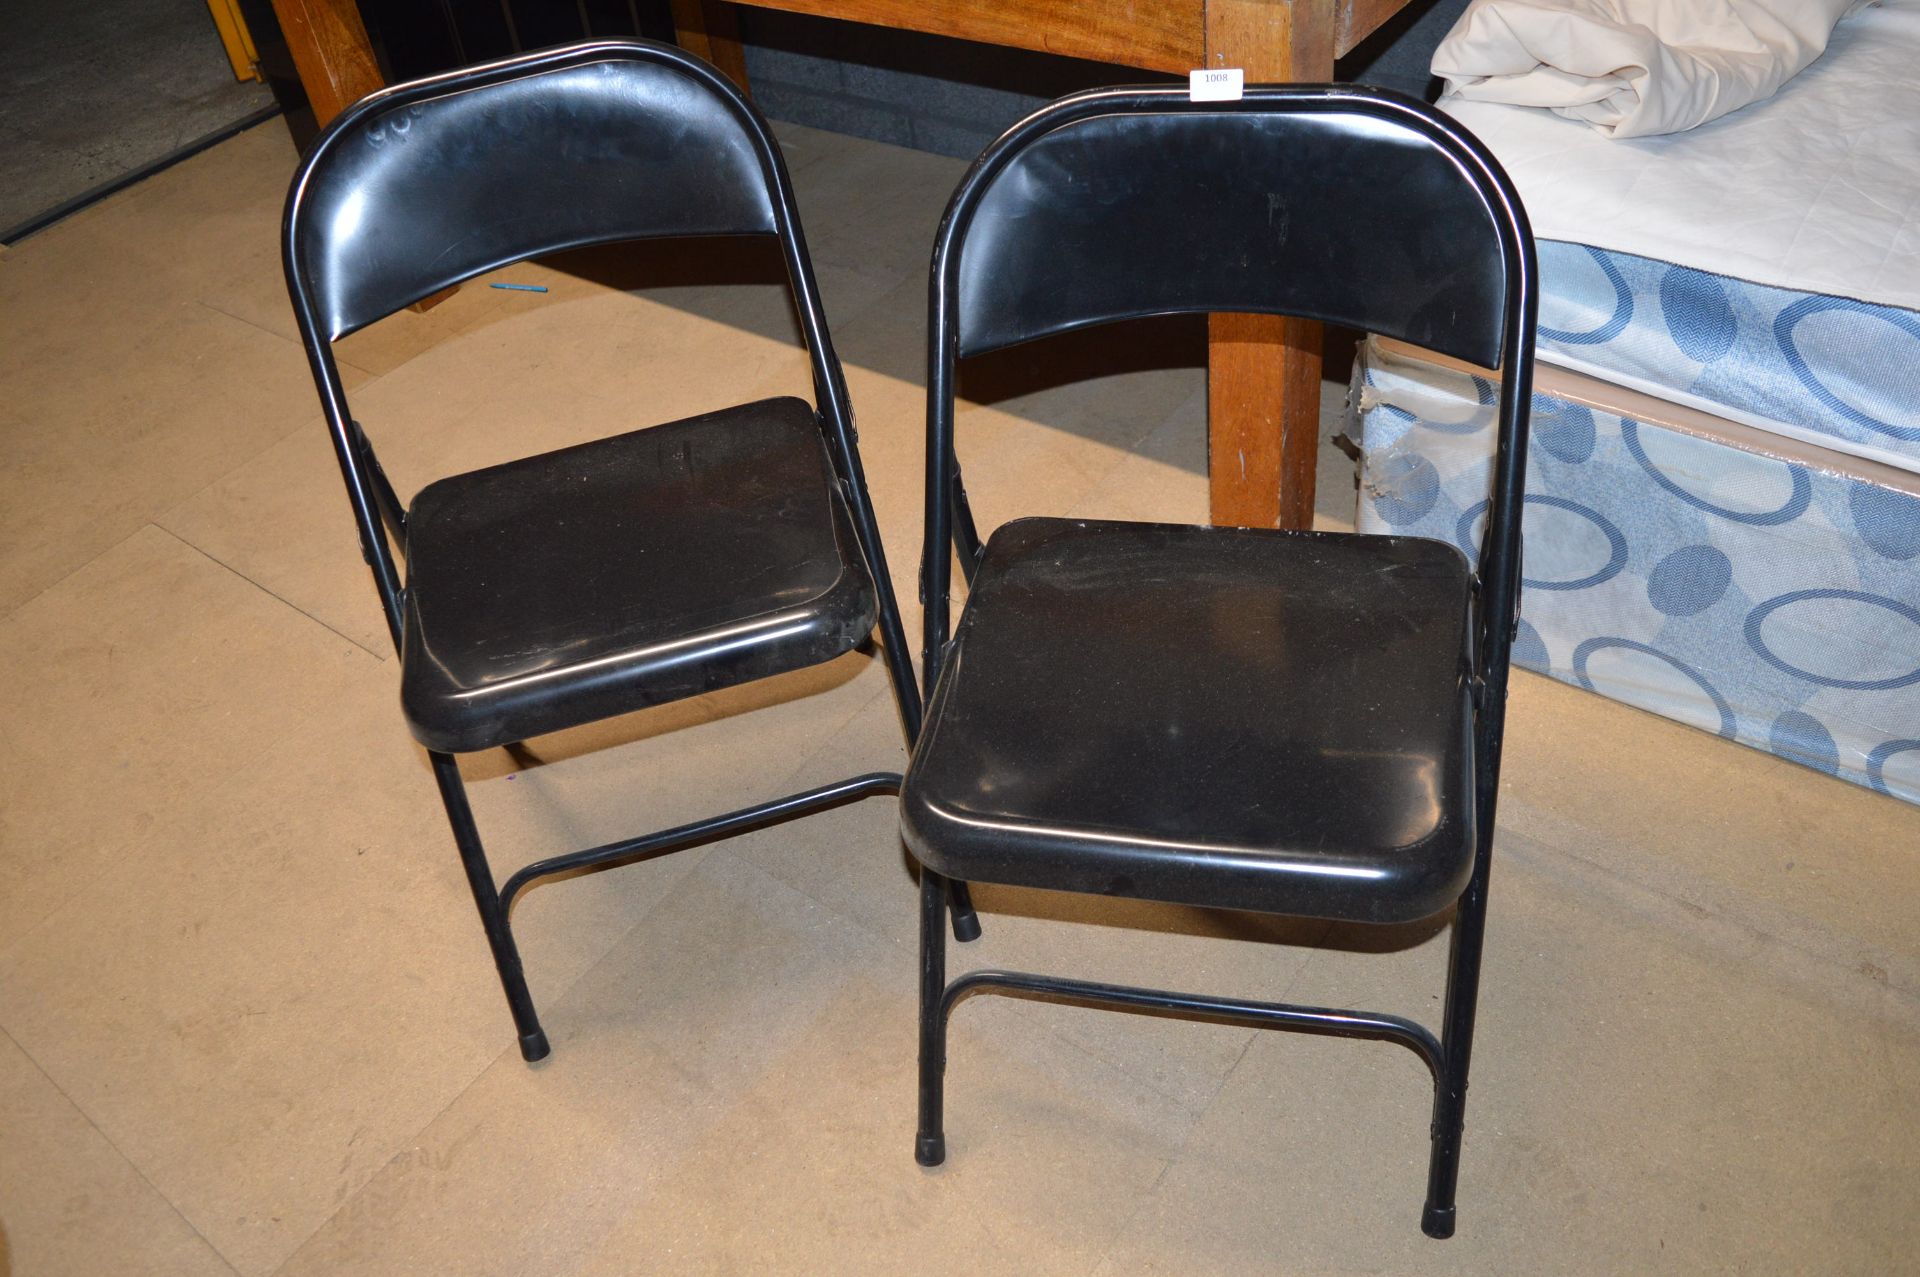 Two Black Folding Steel Chairs